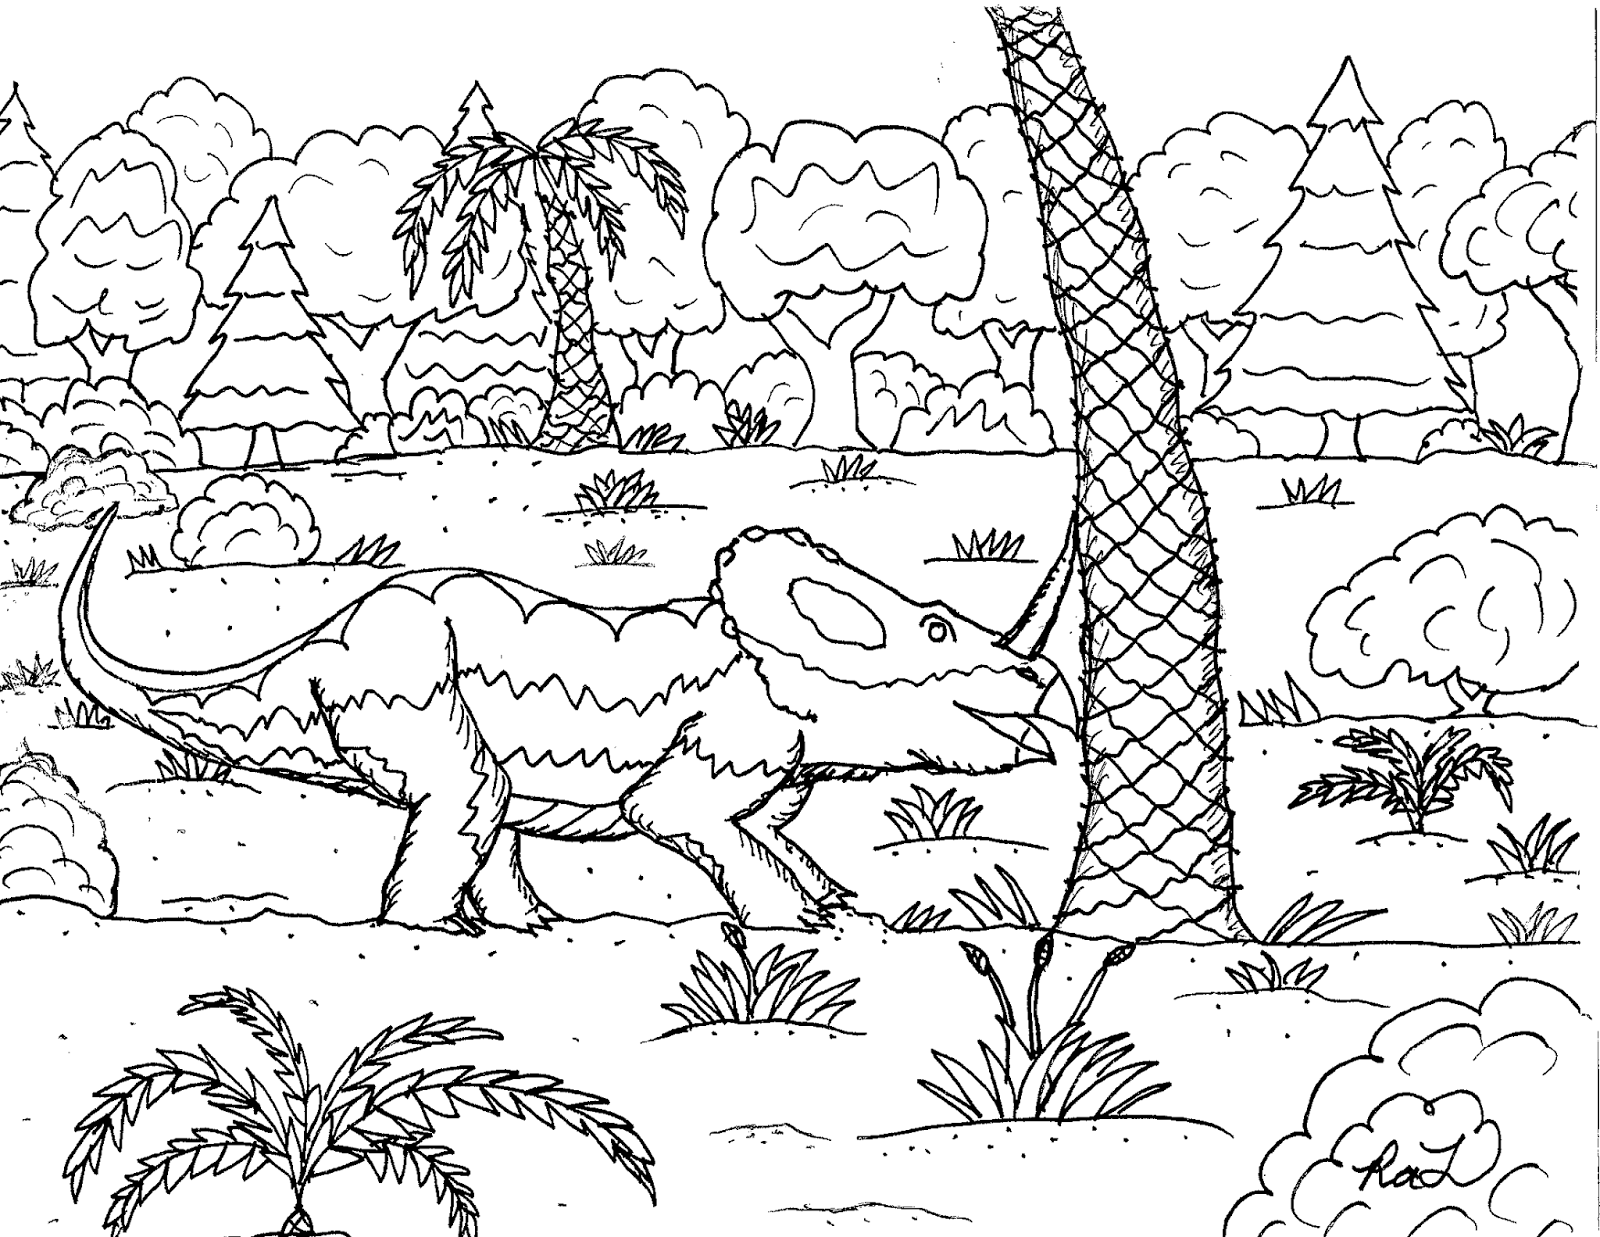 Download 134+ Gorgosaurus Vs. Monoclonius From Dinosaurs Coloring Pages PNG PDF File